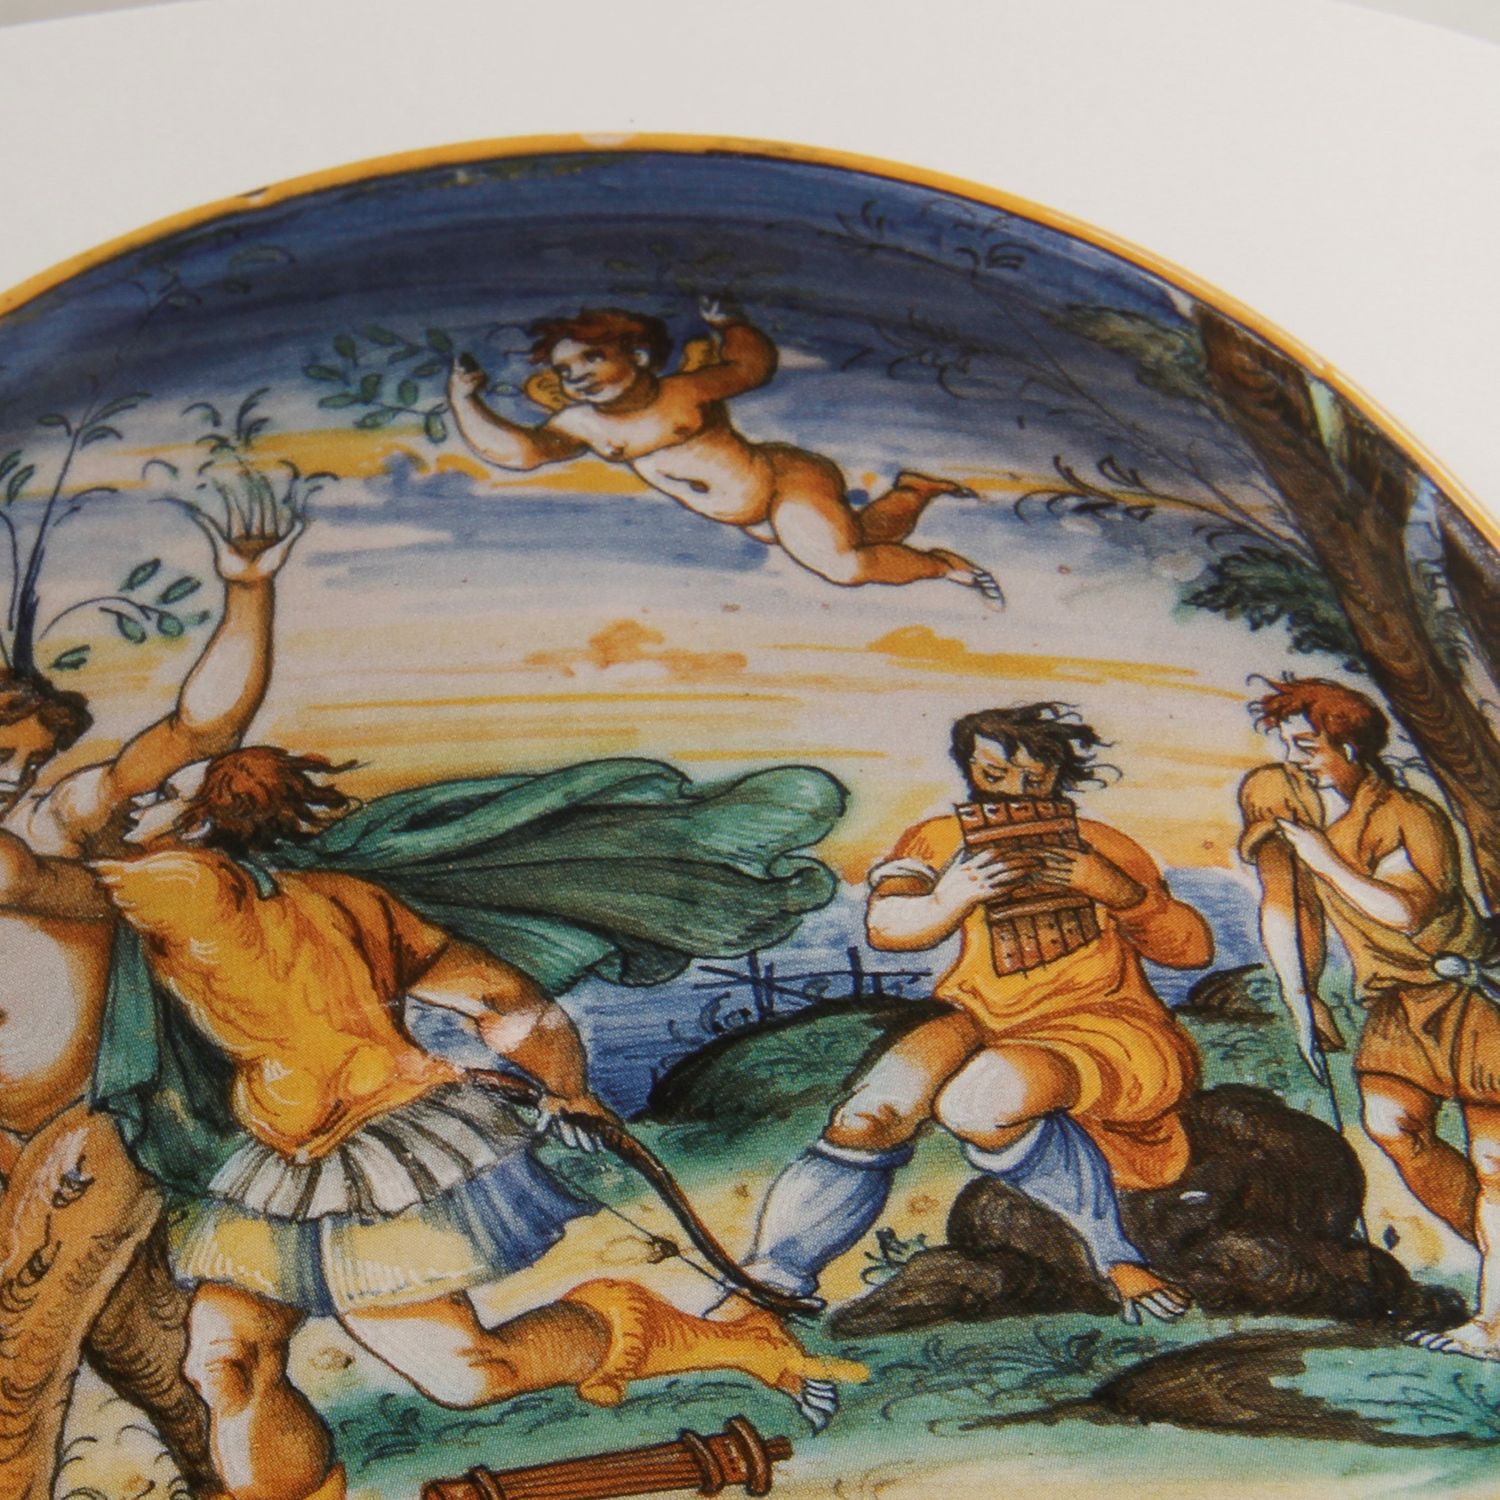 Maiolica in Renaissance Venice: Ceramics and Luxury at the Crossroads Product Image 3 of 5